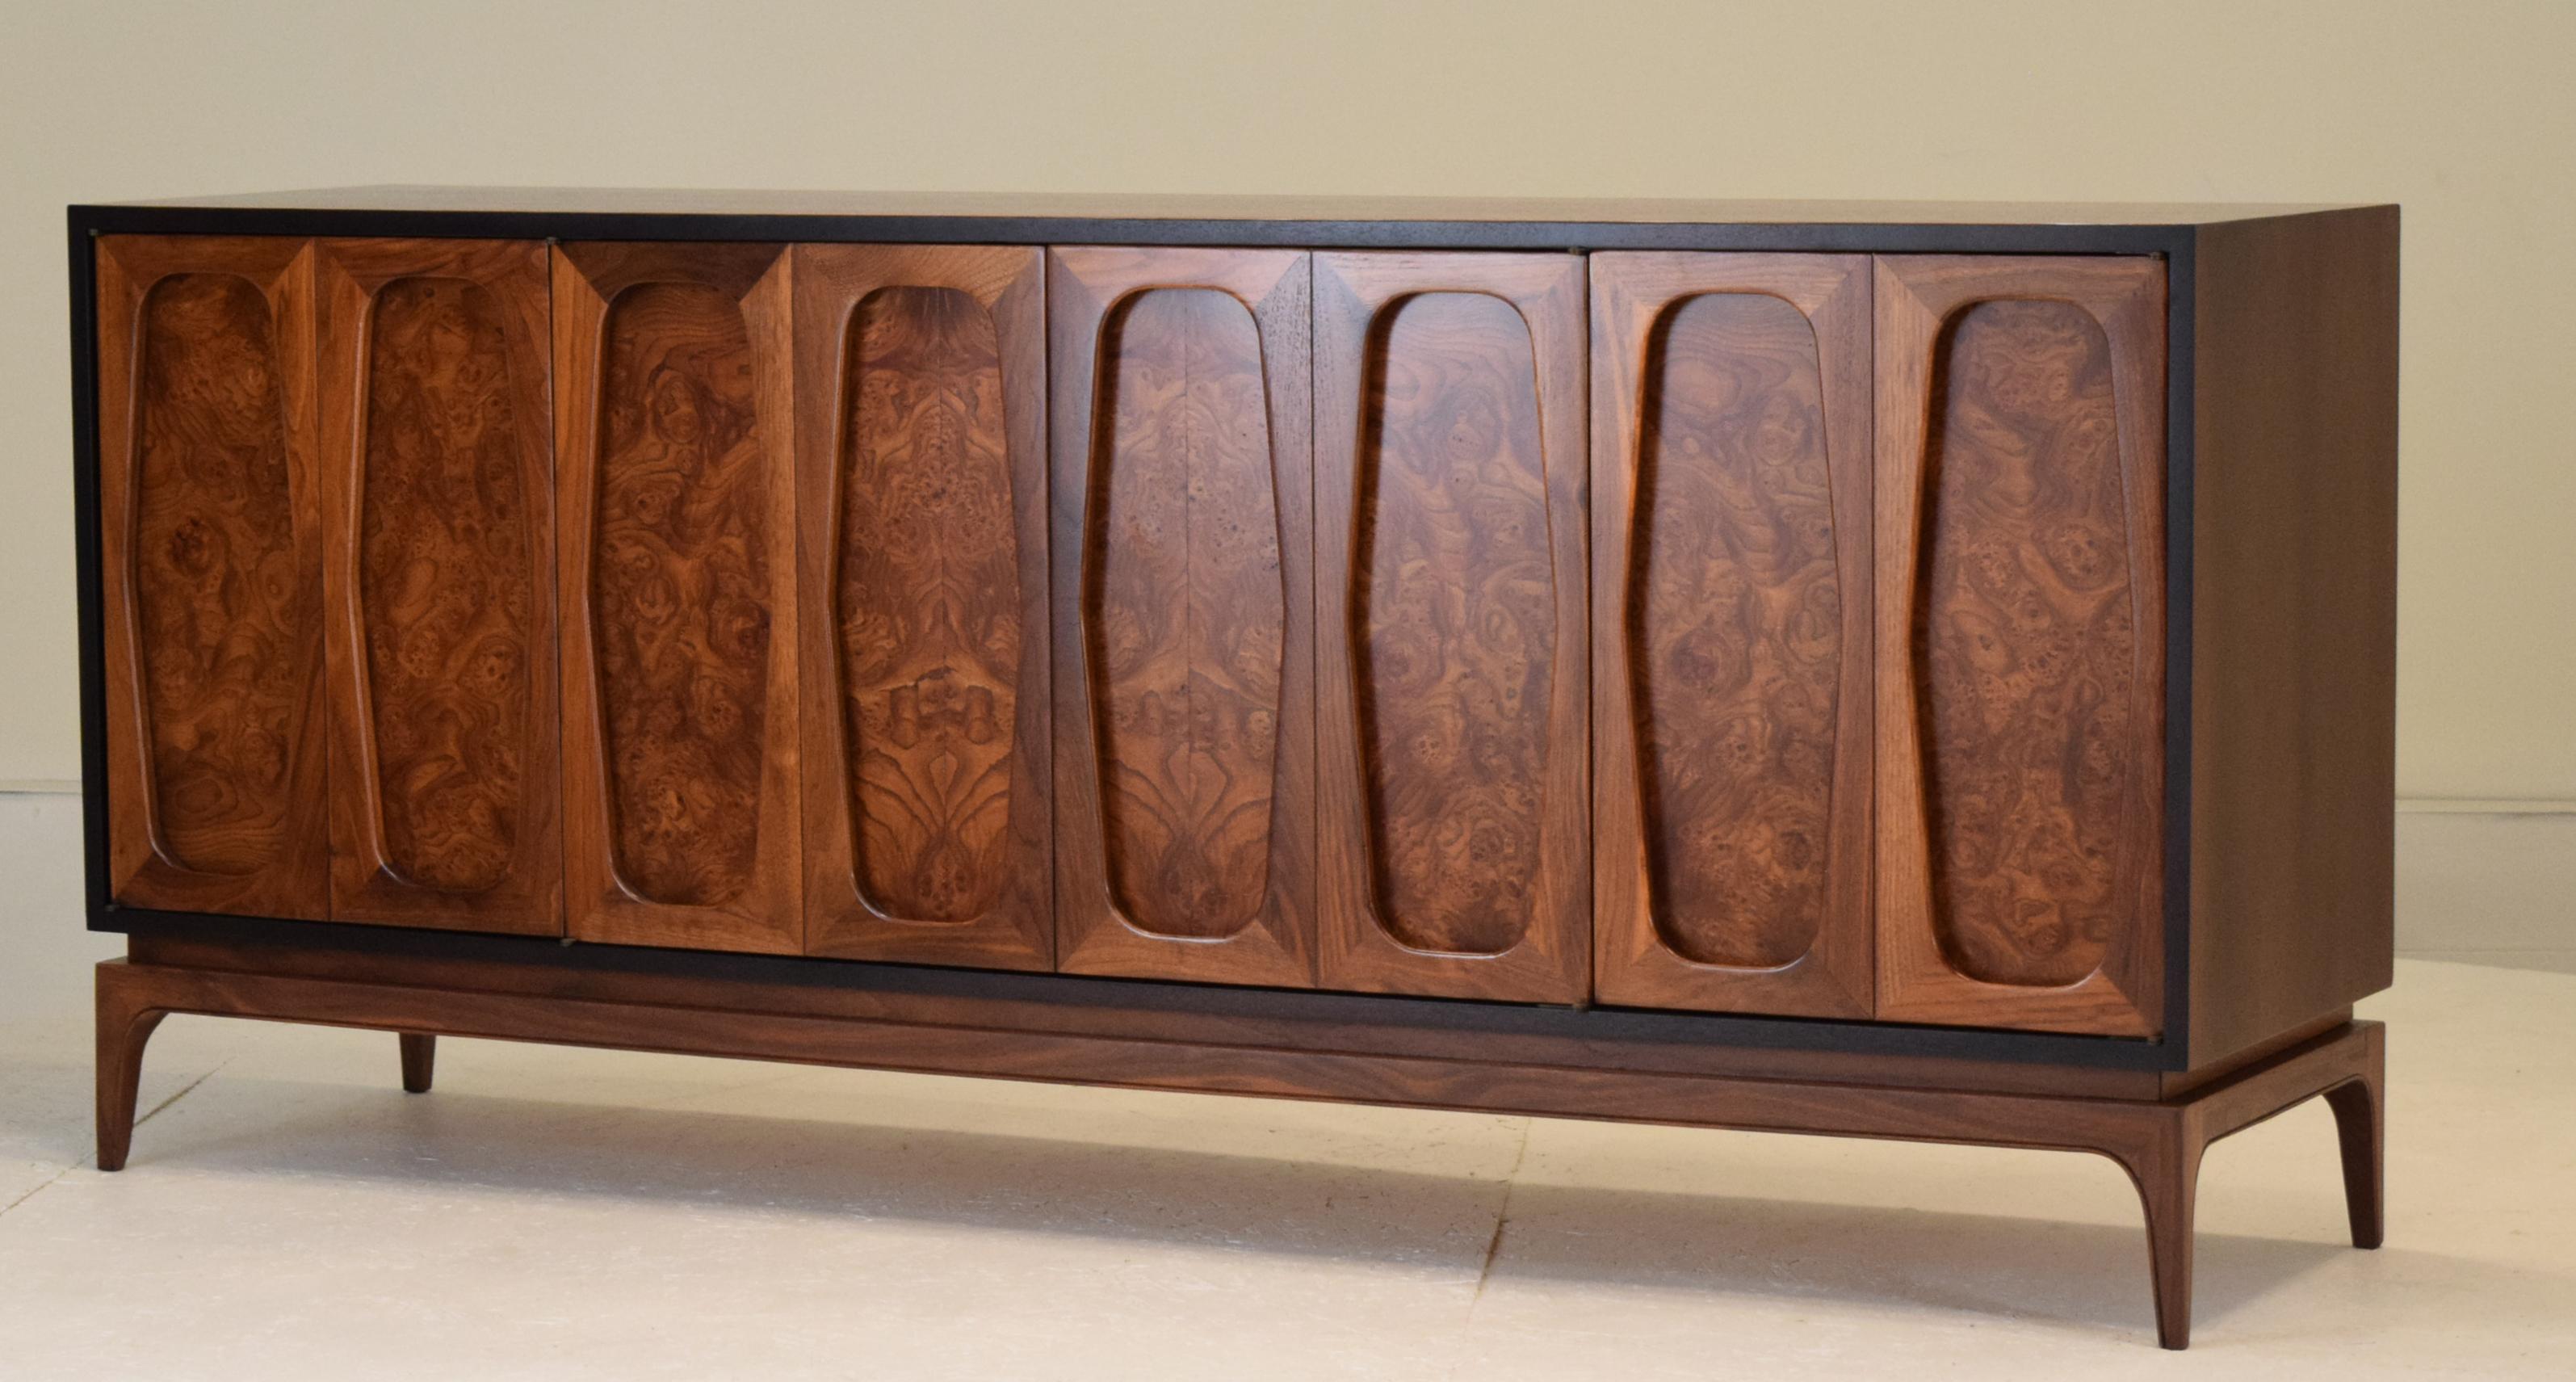 A unique buffet custom made by Specialty Woodcraft Inc. of N.J. measures: 73.5